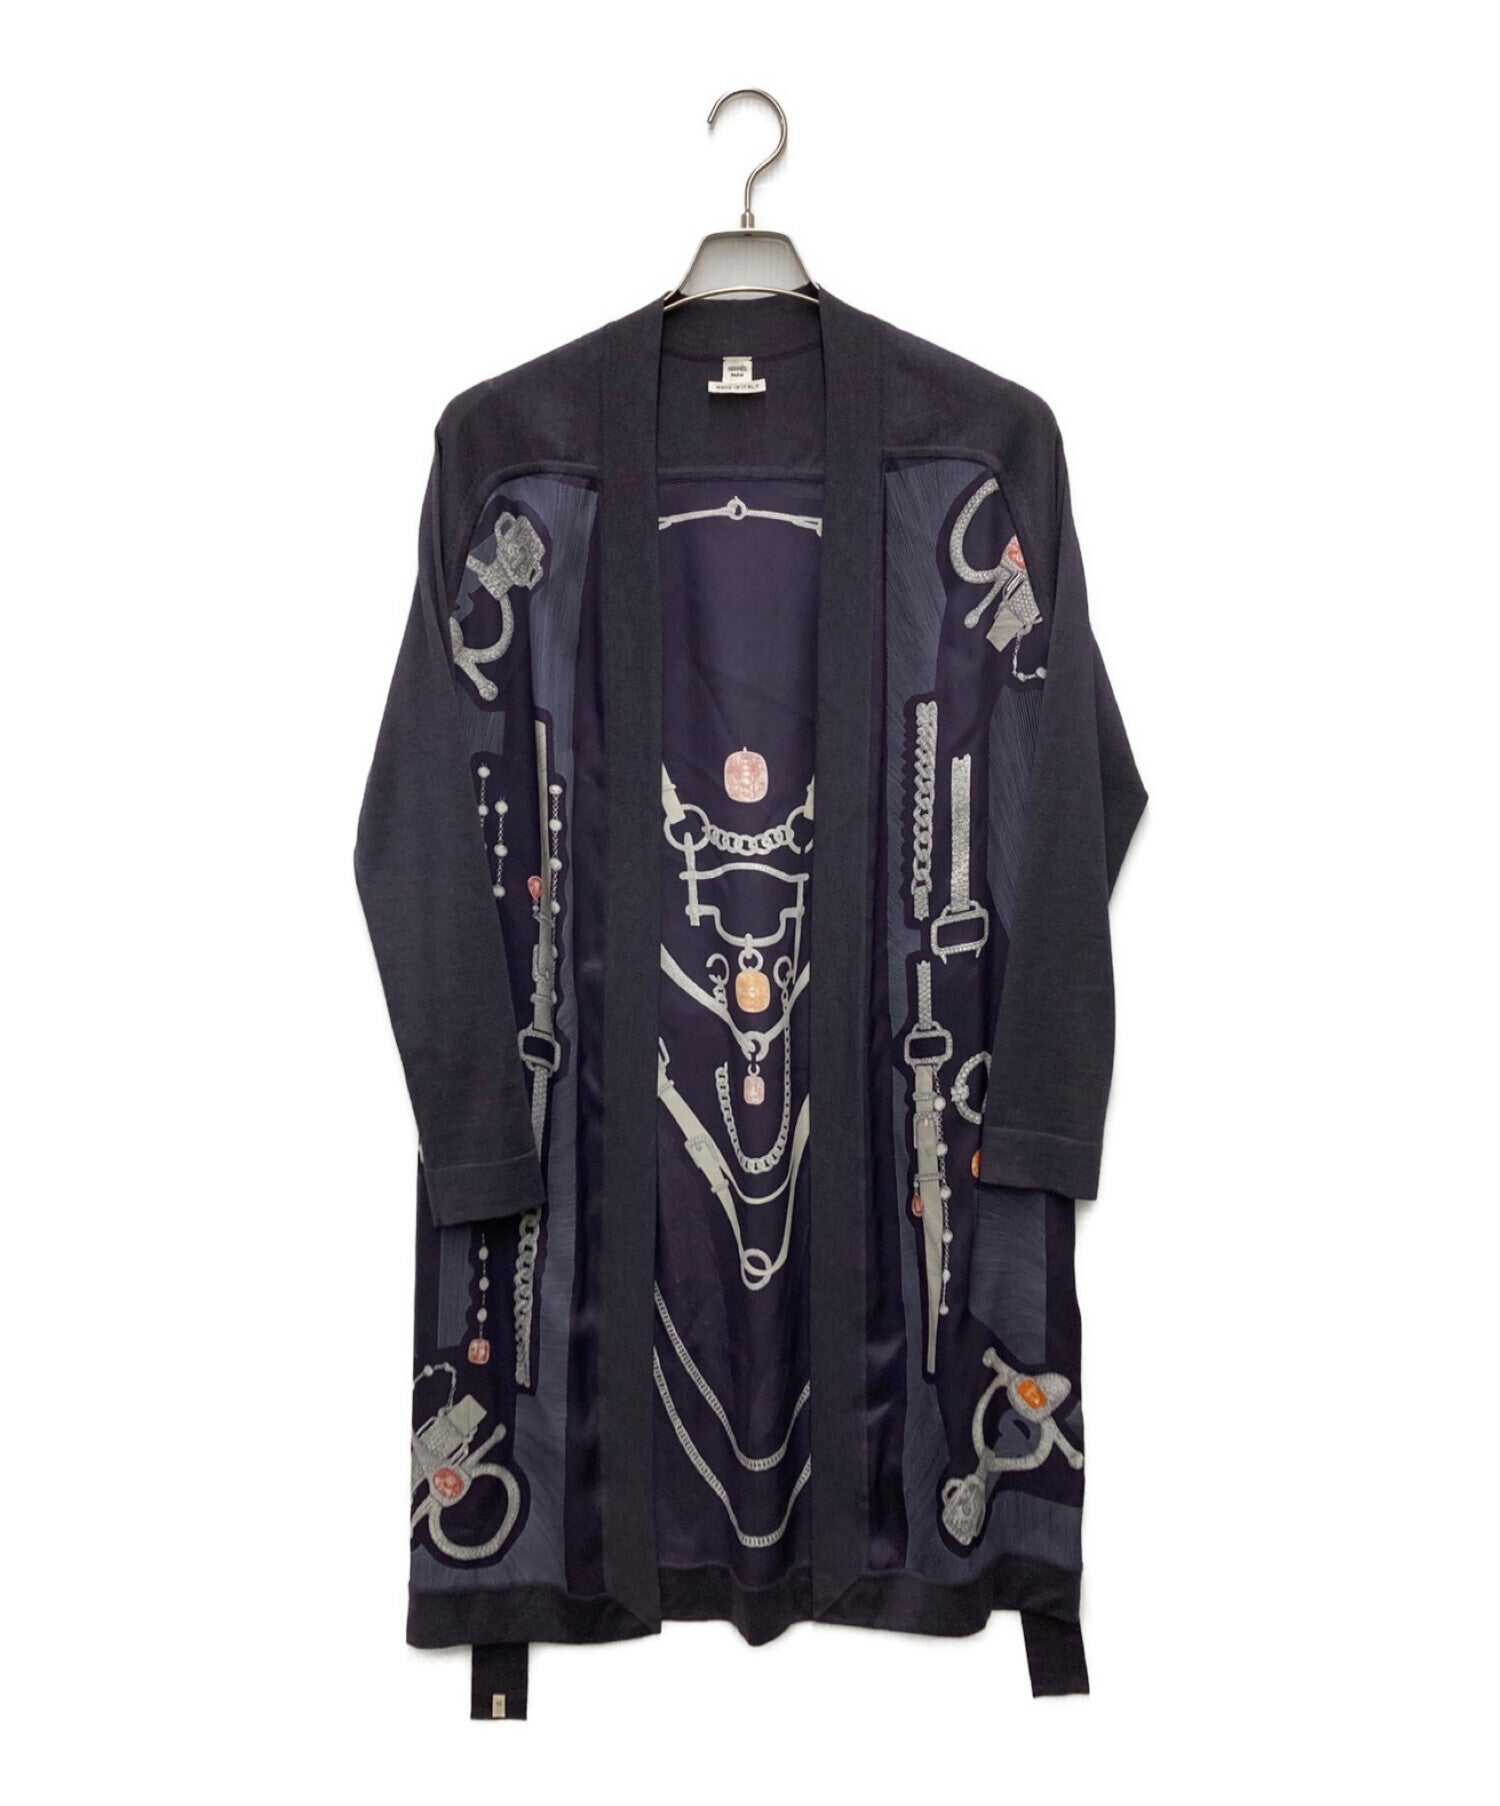 COMME des GARCONS sheer-switched cardigan GJ-04021S